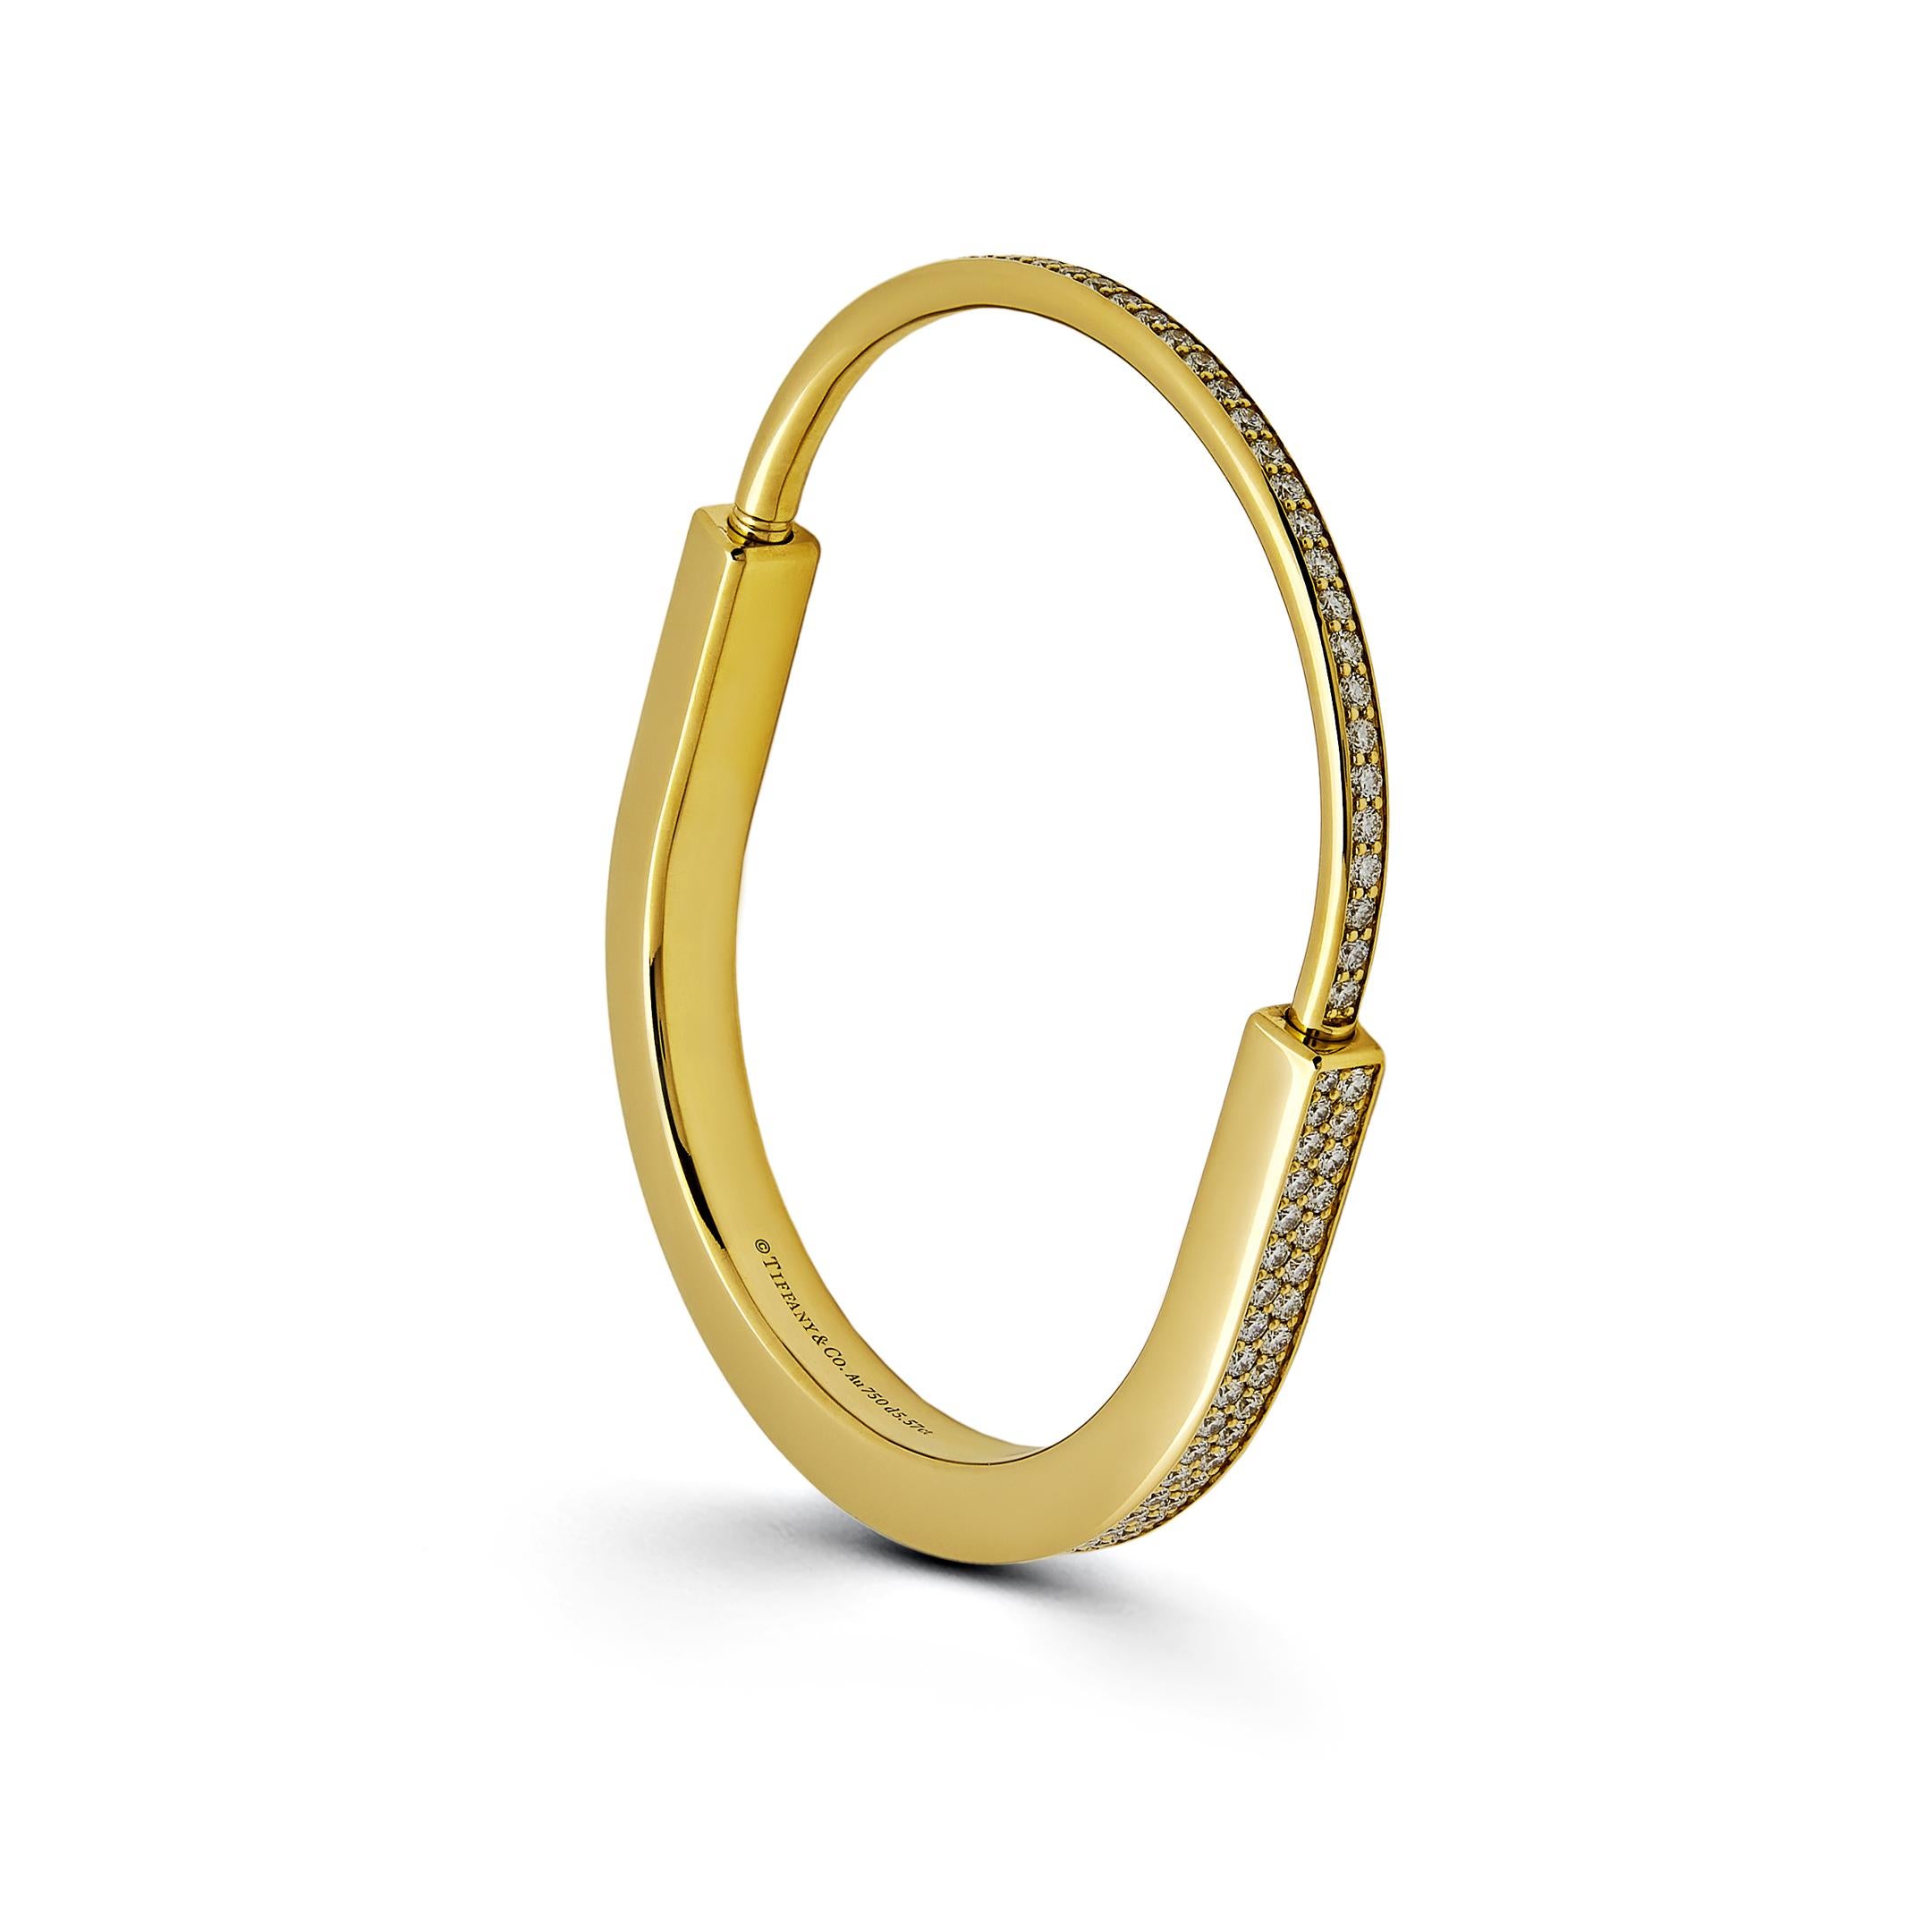 Tiffany & Co. Lock Bangle in Yellow Gold with Full Pavé Diamonds 70158264 In Excellent Condition For Sale In New York, NY